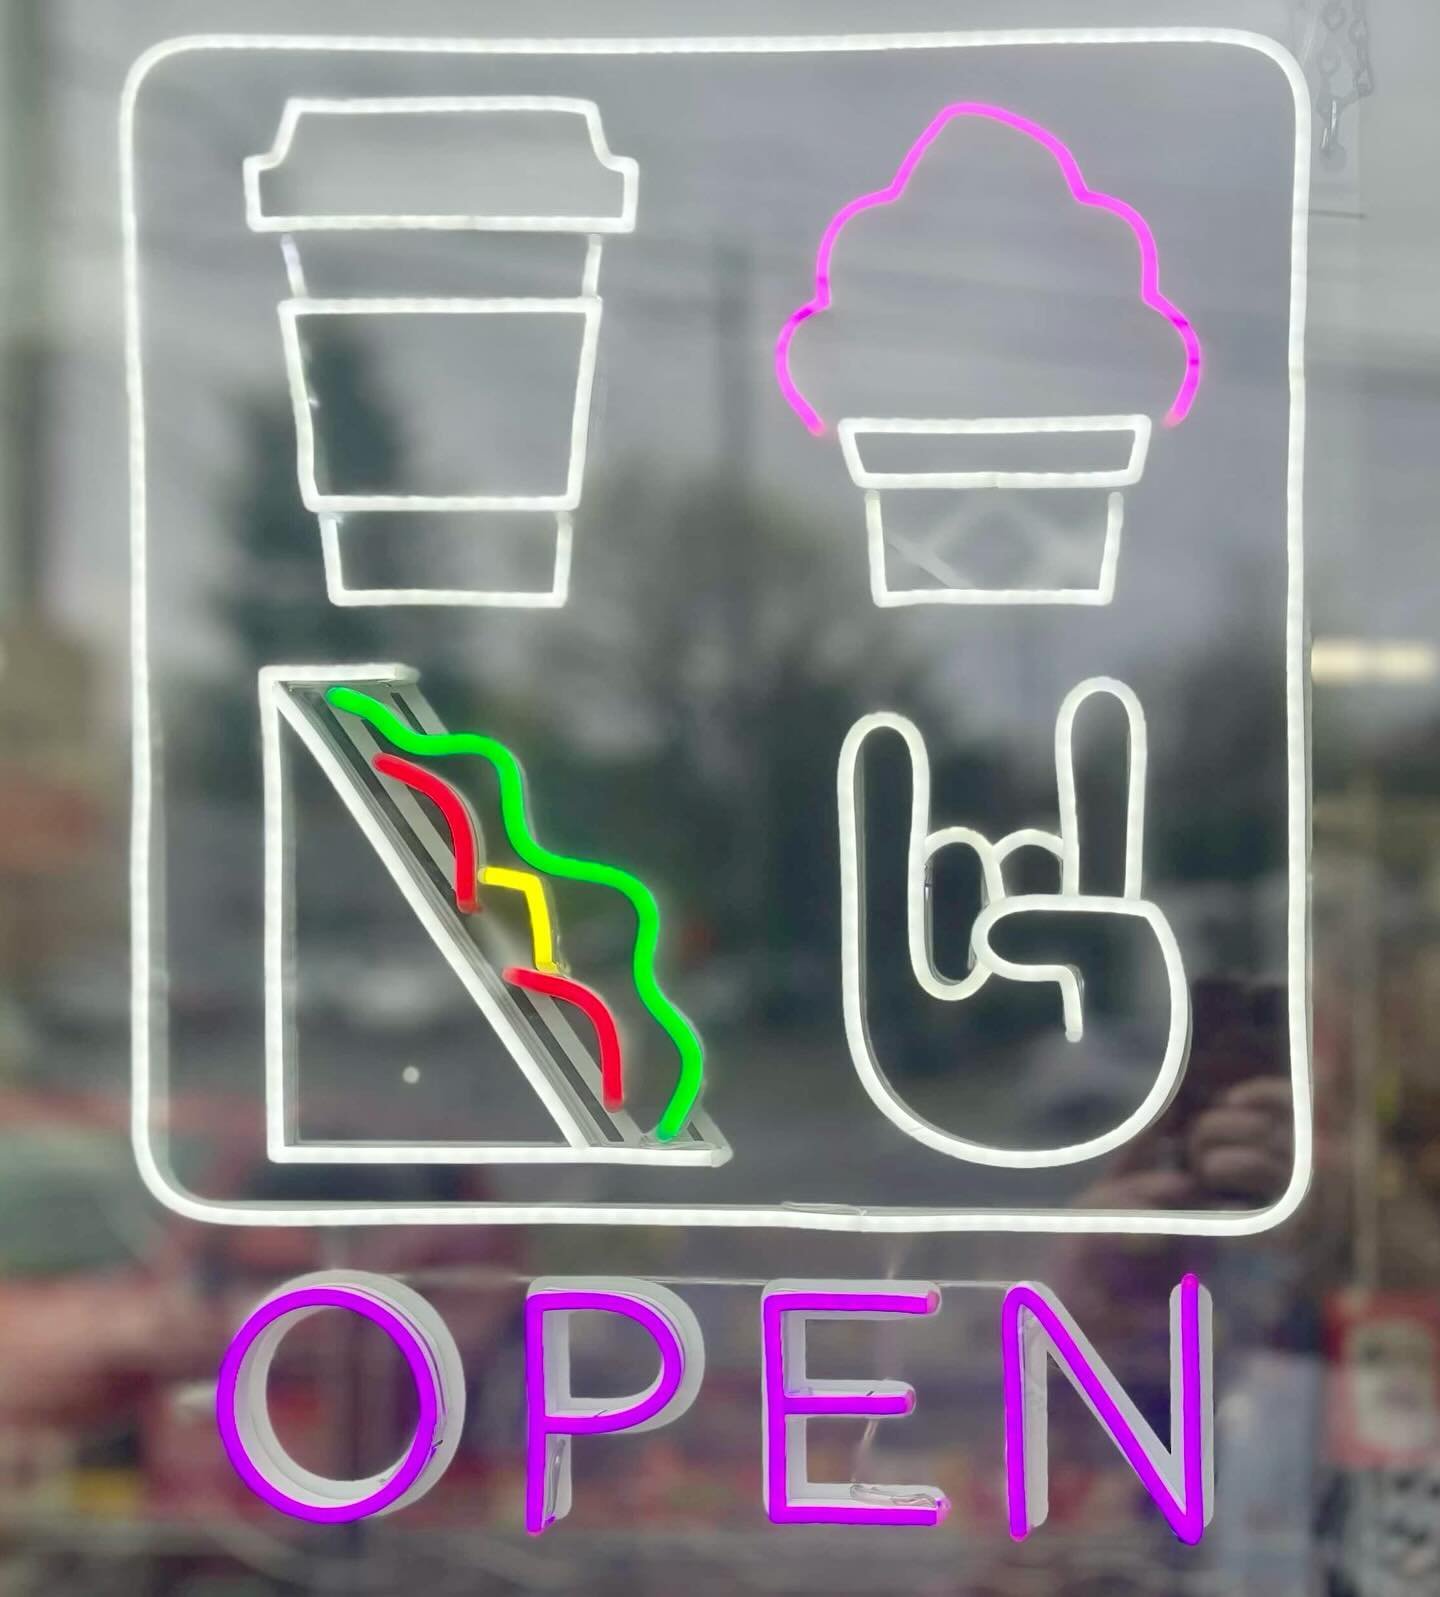 Our new OPEN sign! 😍 Designed by Teo on our staff, to accurately reflect what we do at the Corner Store: ☕️🍦🥪🤘 

#open #highlandpark #cornerstore #westseattle #rexmanningday #ajfixthesign